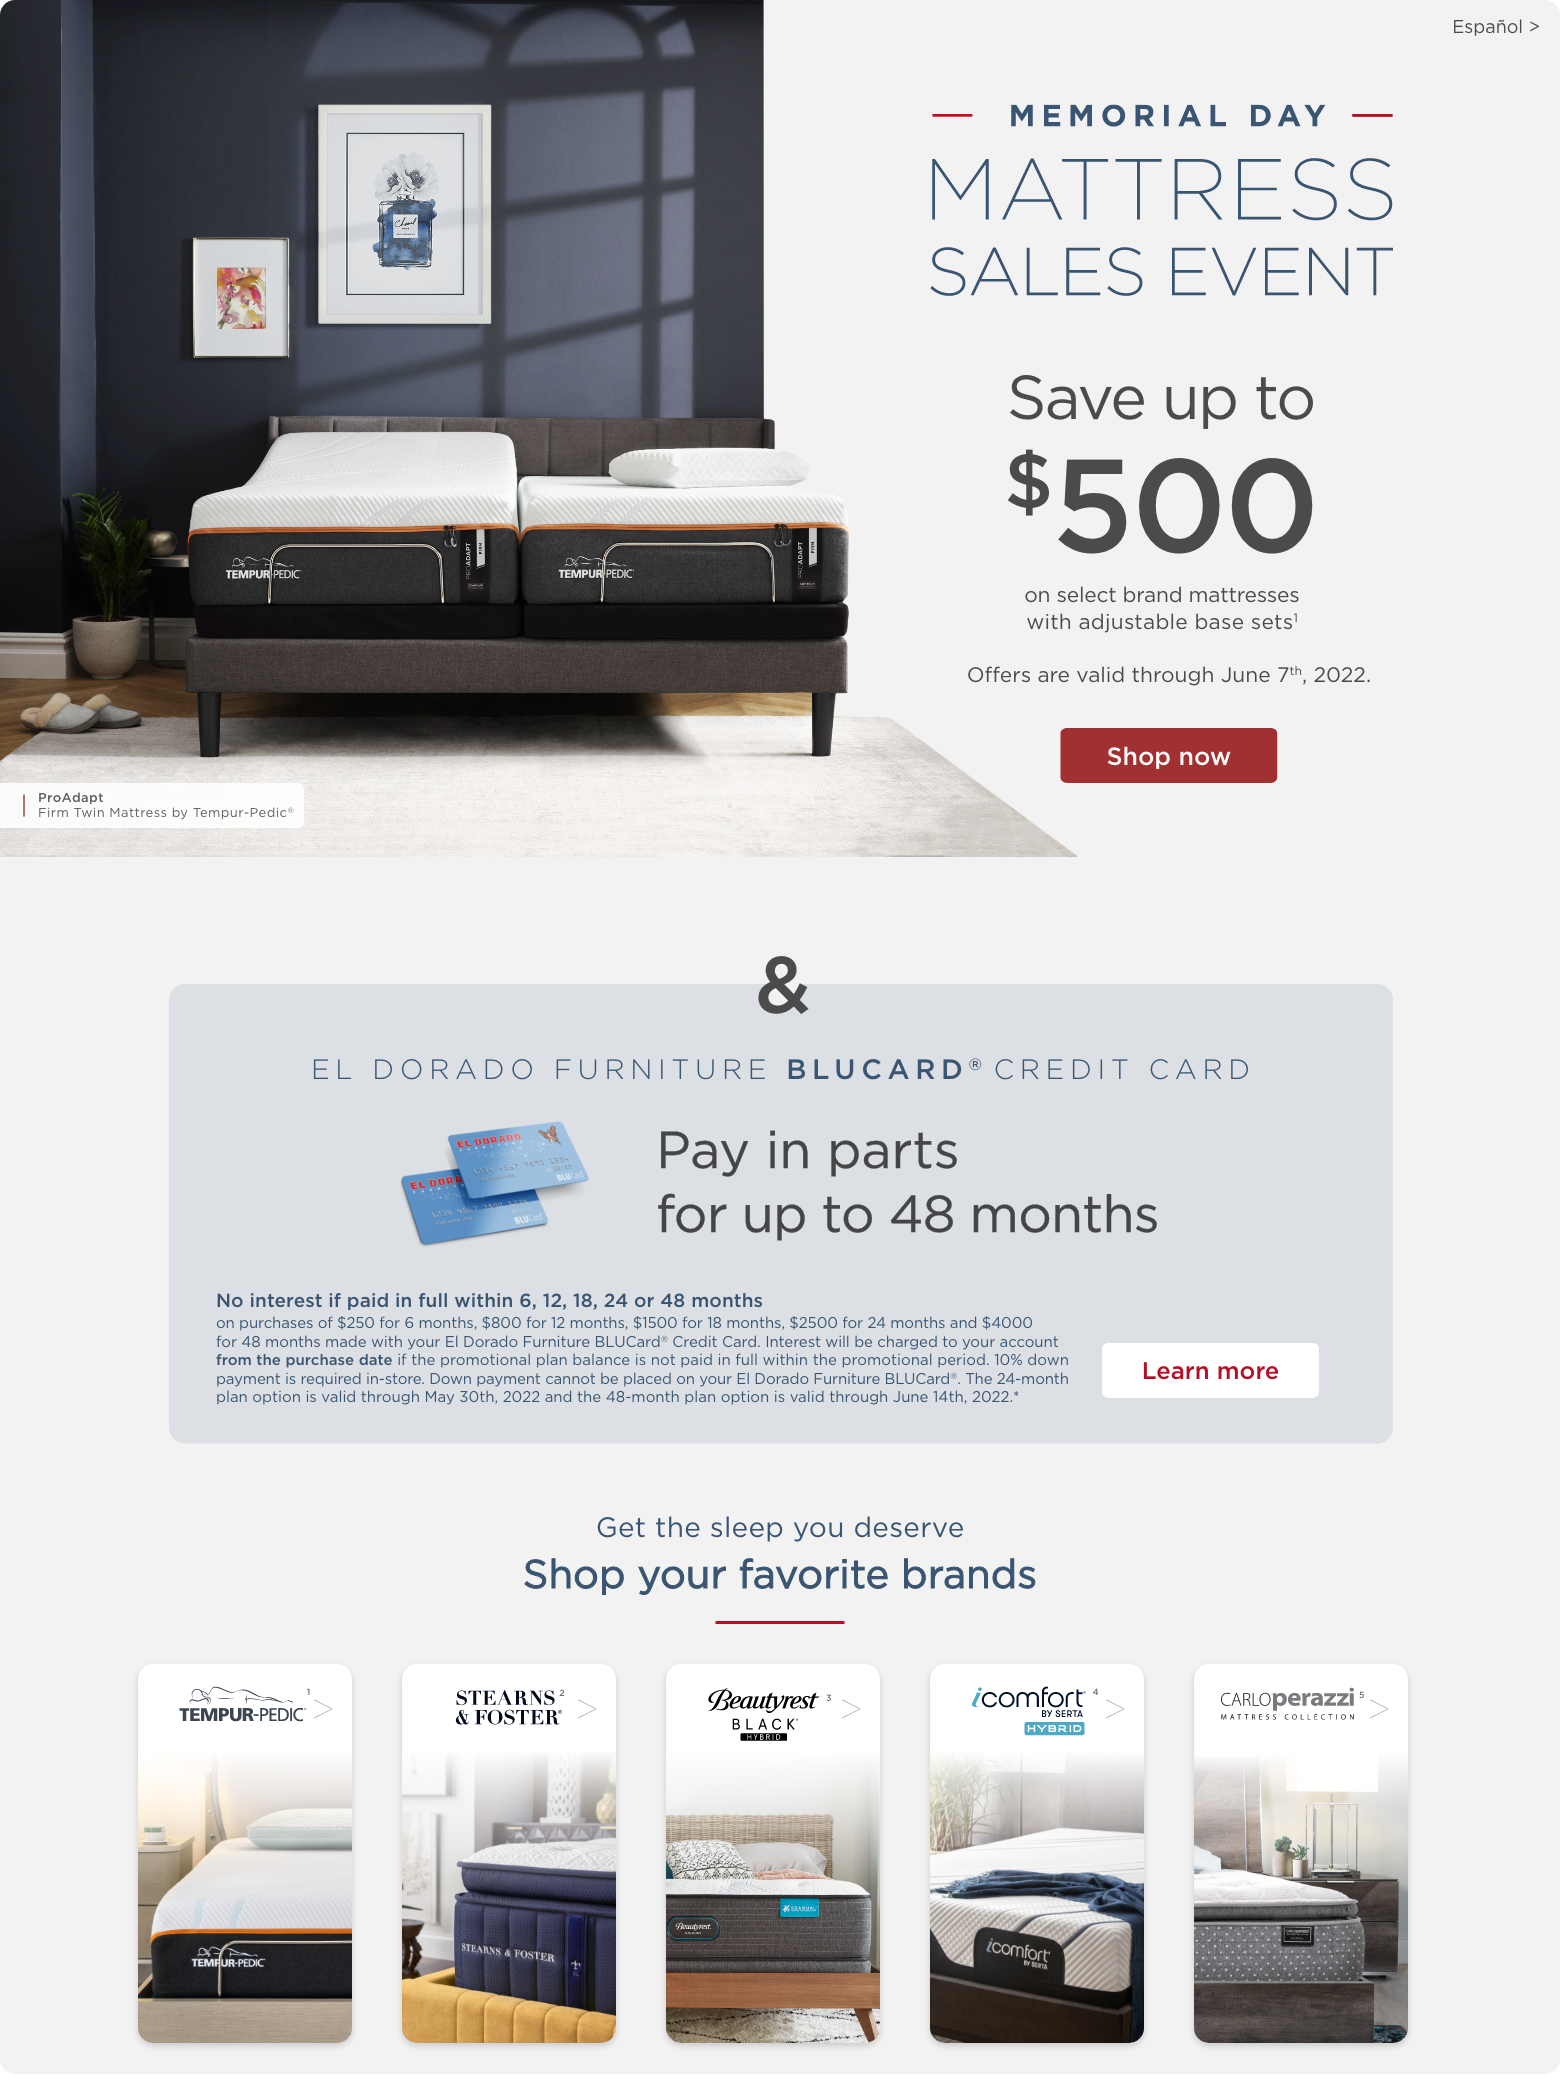 Memorial Day Mattress Sales Event Save up to $500 on select brand mattresses with adjustable base sets1. Offers are valid through June 14th, 2022. Shop now. & El Dorado Furniture BLUCard Credit Card. Pay in parts for up to 48 months. n purchases of $250 for 6 months, $800 for 12 months, $1500 for 18 months, $2500 for 24 months and $4000 for 48 months made with your El Dorado Furniture BLUCard® Credit Card. Interest will be charged to your account from the purchase date if the promotional plan balance is not paid in full within the promotional period. 10% down payment is required in-store. Down payment cannot be placed on your El Dorado Furniture BLUCard®. The 24-month plan option is valid through May 30th, 2022 and the 48-month plan option is valid through June 14th, 2022.* Learn more. Get the sleep you deserve. Shop your favorite brands. Tempur-Pedic1. Stearns & Foster2. Beautyrest Black Hybrid3. iComfort by Serta Hybrid4. Carlo Perazzi Mattress Collection5.